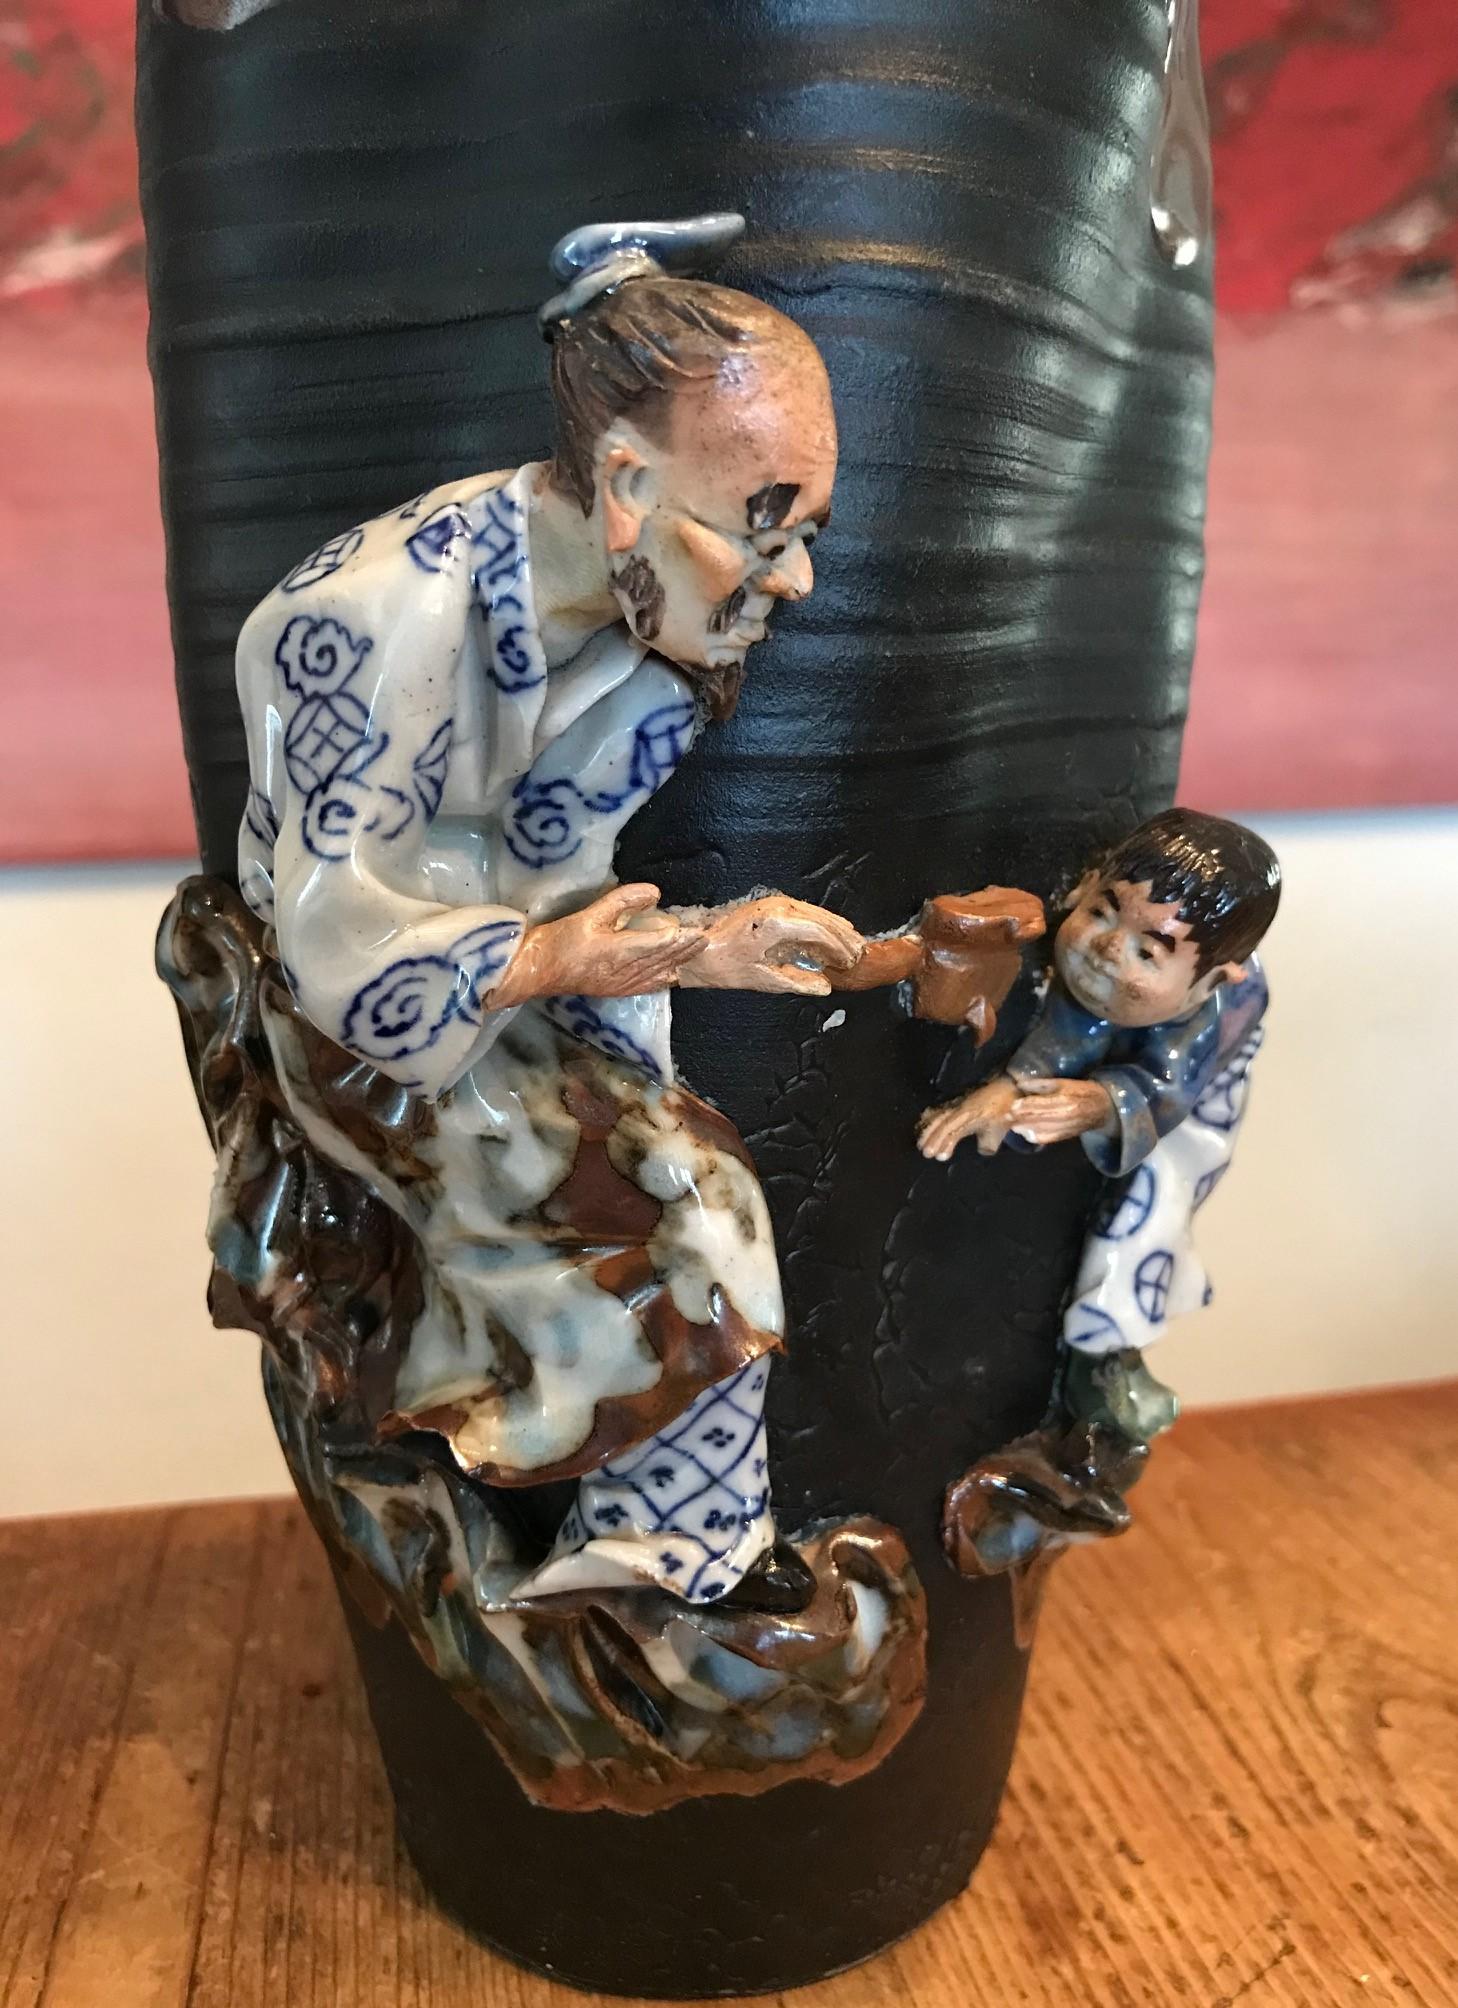 A fantastic Japanese Sumida Gawa vase, circa late 1800s-early 1900s

This vase, sage with boy was likely made by renowned potter Ishiguro Koko

Signed on side.

Dimensions: 12